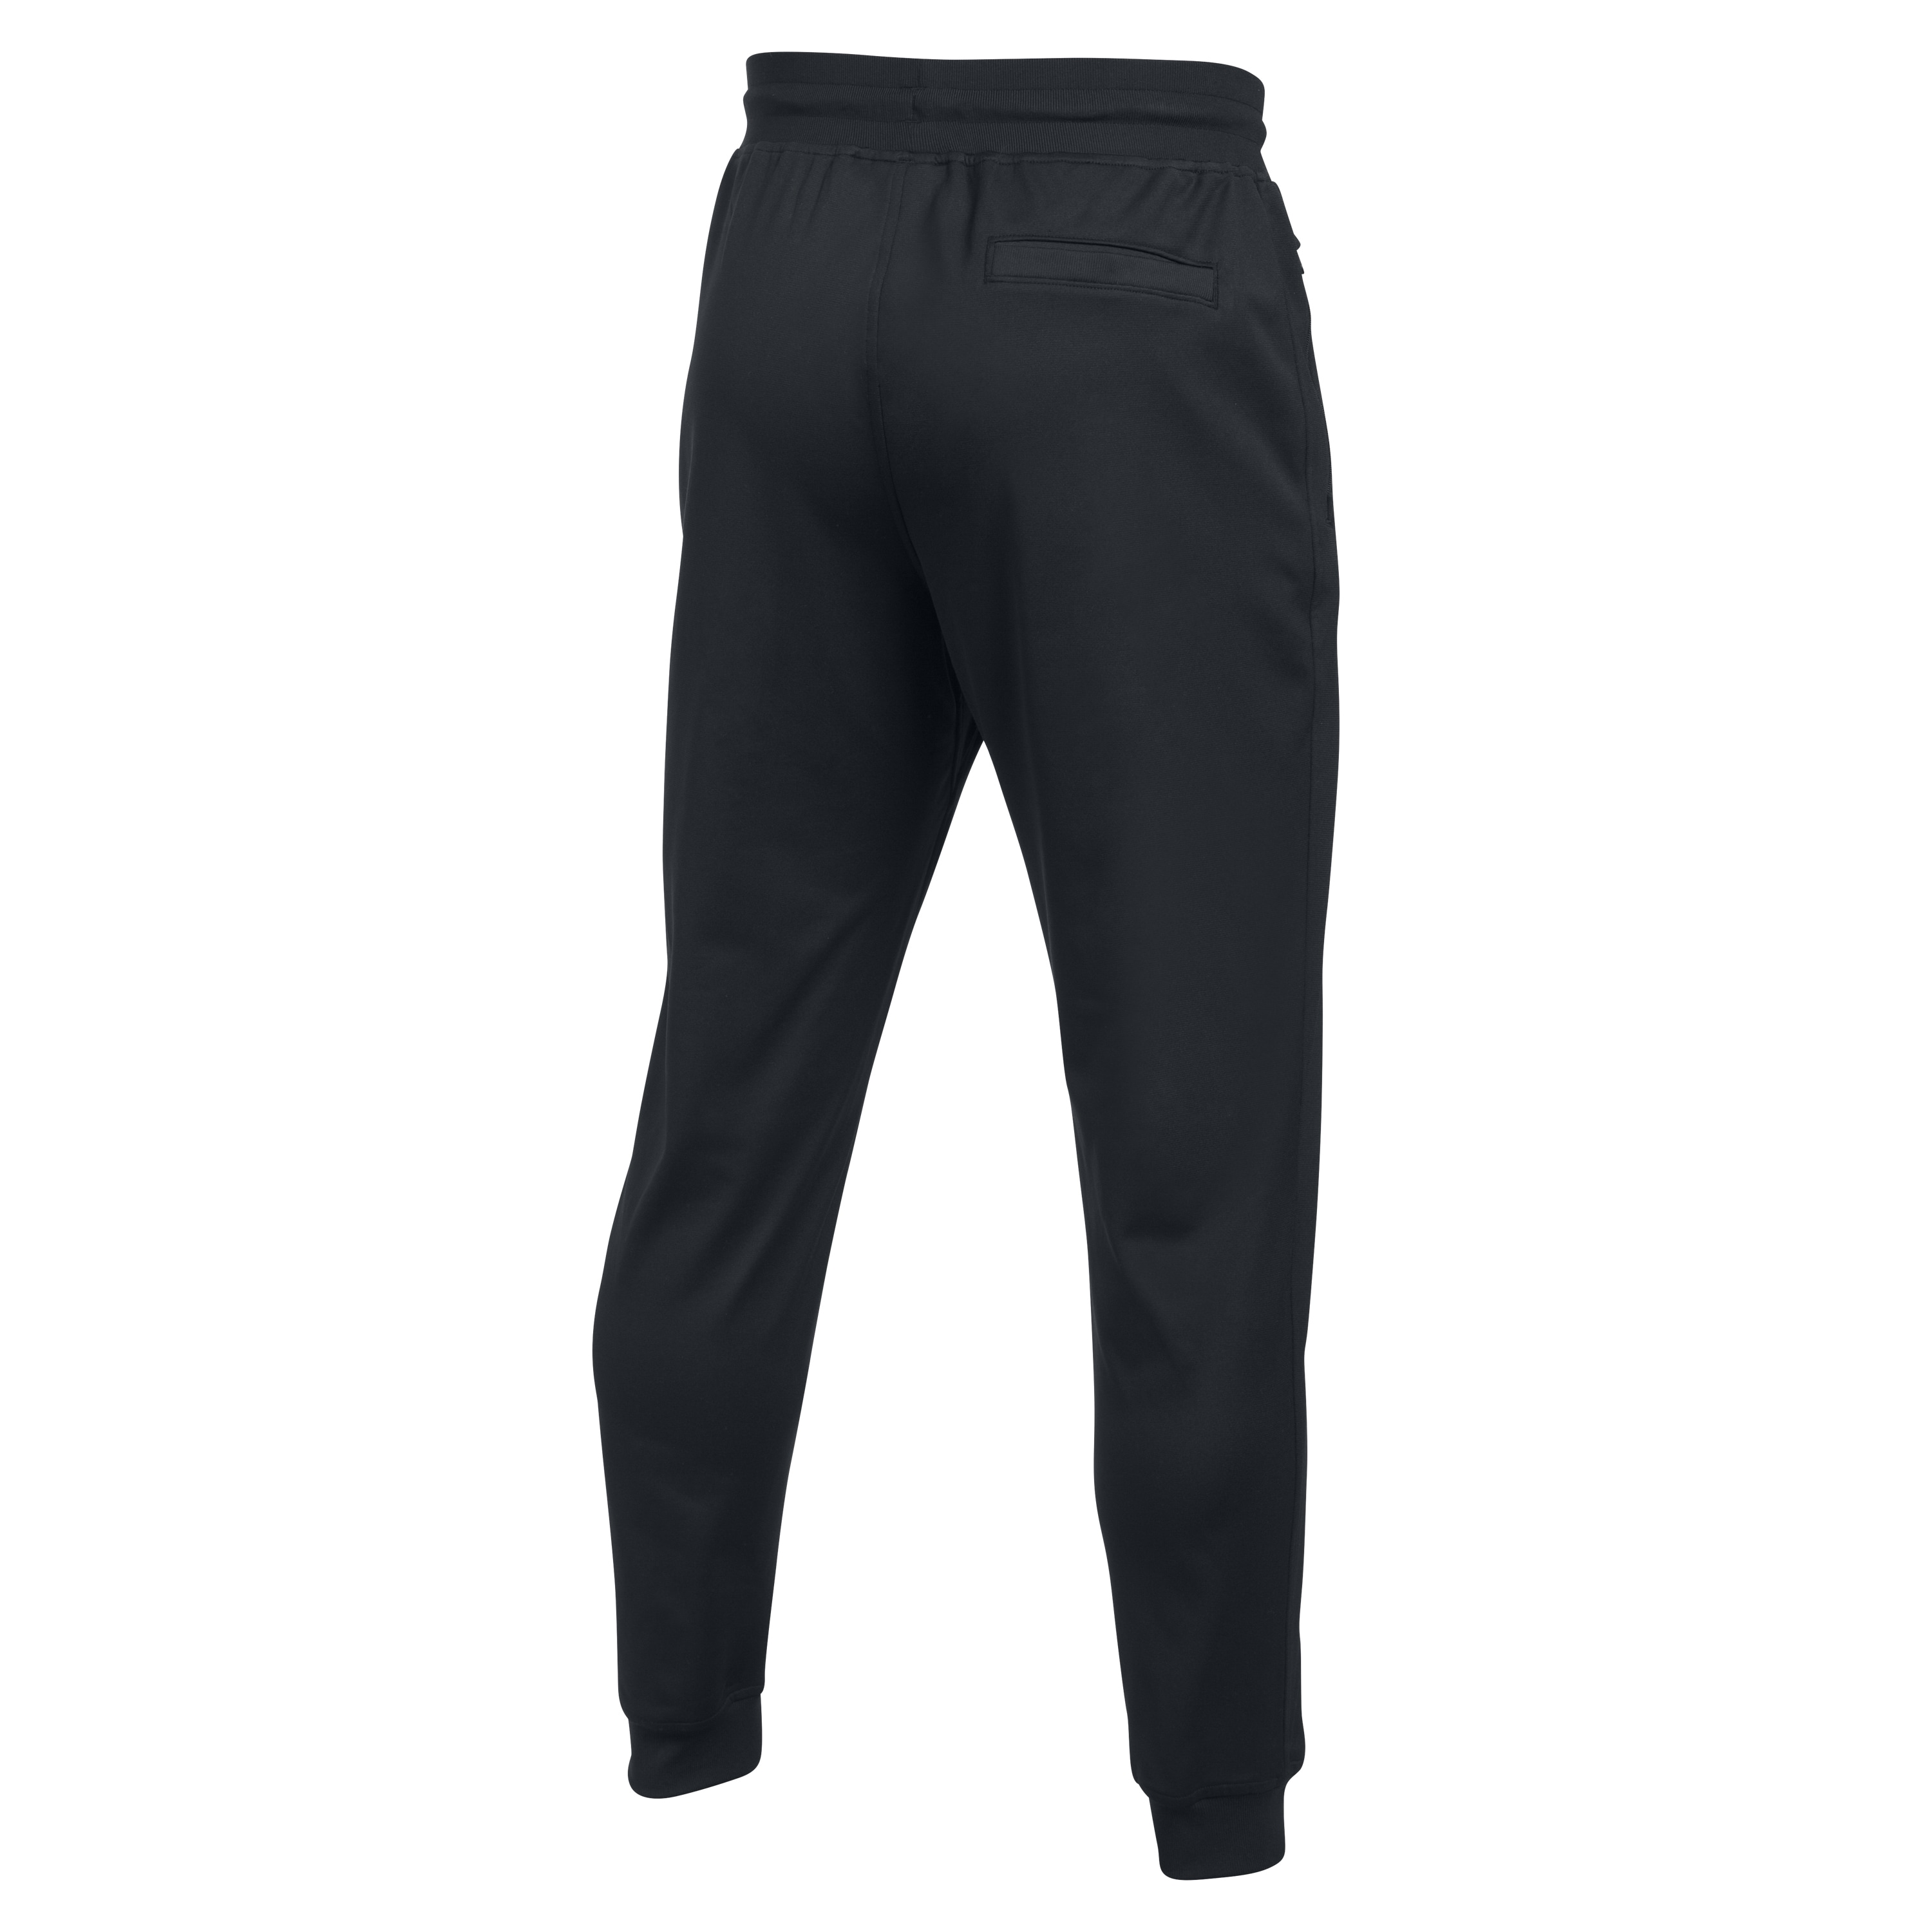 Under Armour Fitness Sportstyle black/white